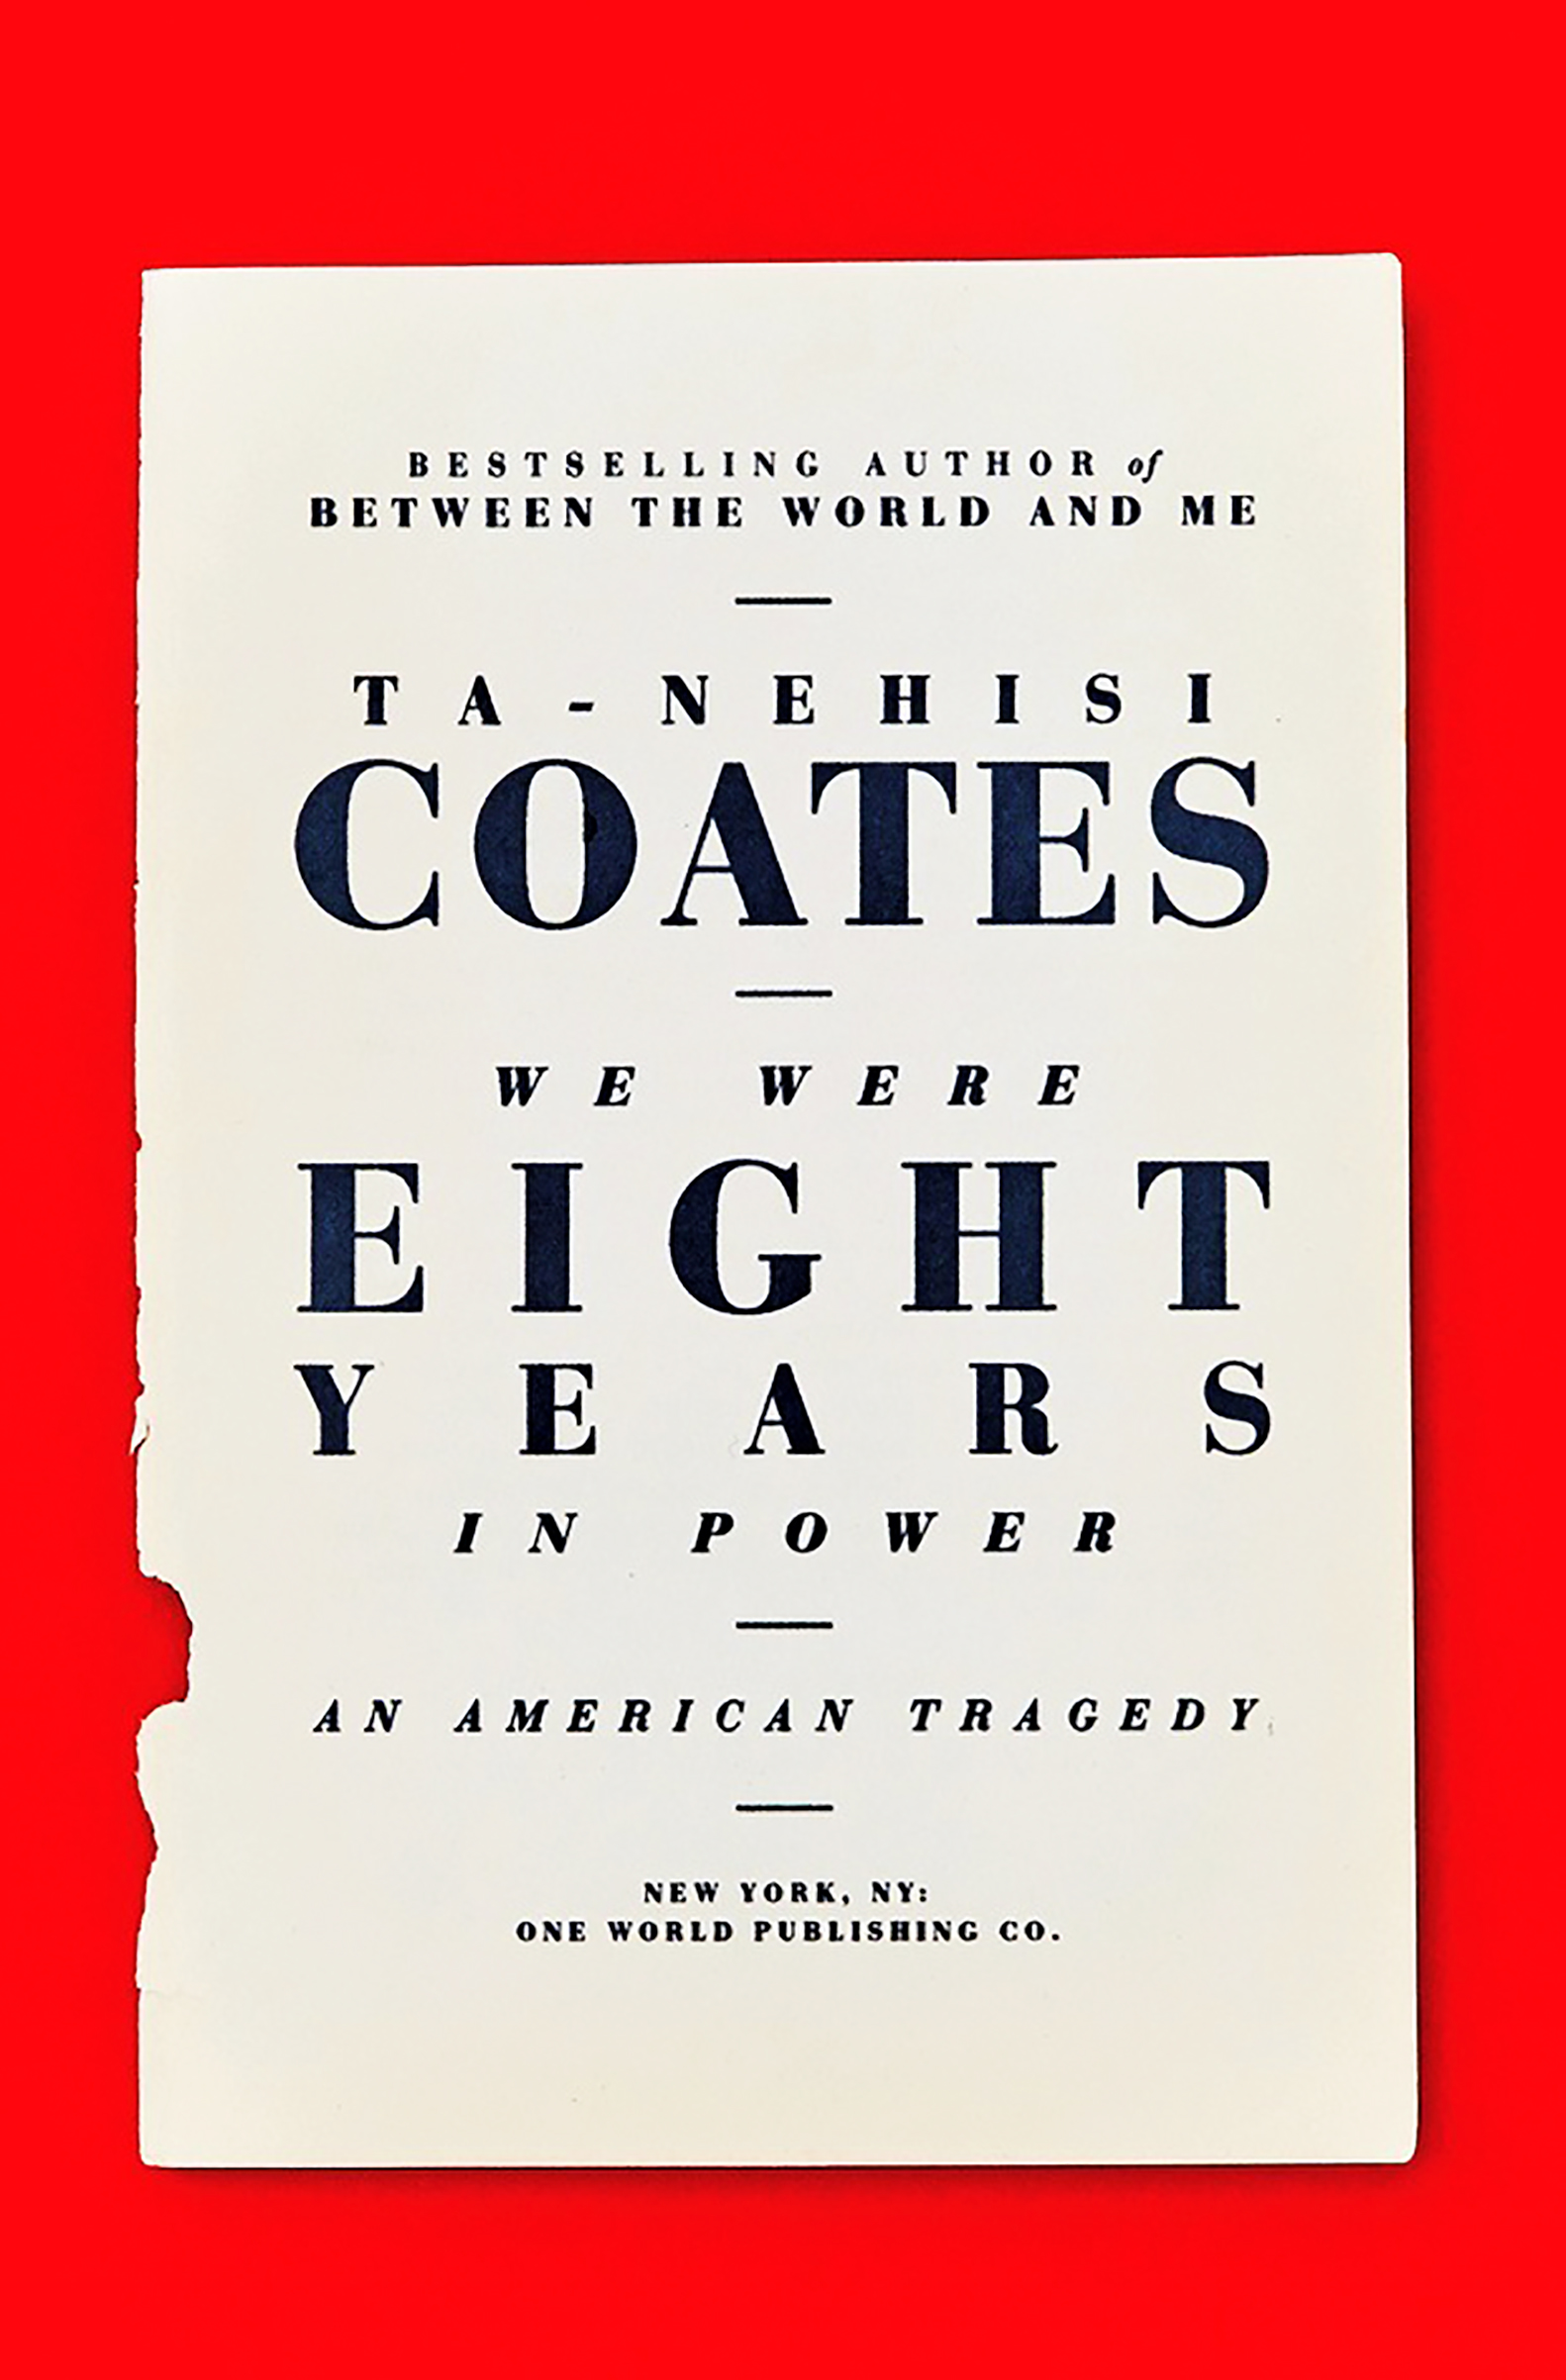 The book follows Coates’ 2015 polemic, Between the World and Me, which won the National Book Award